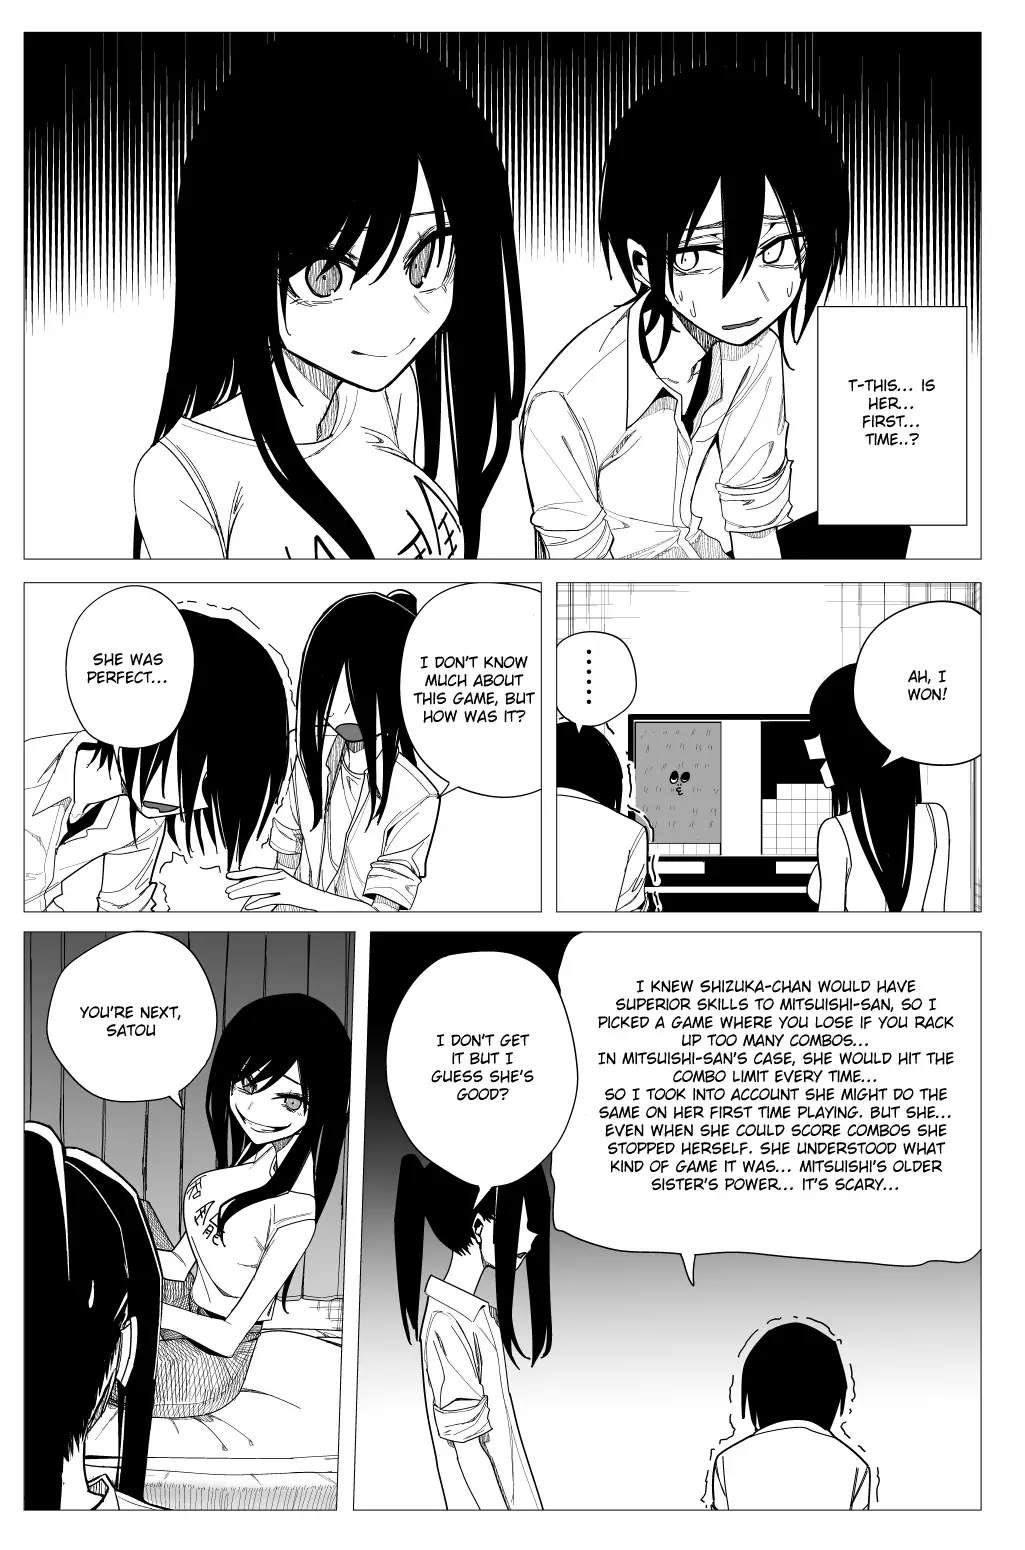 Mitsuishi-San Is Being Weird This Year - 27 page 12-7674c5fd